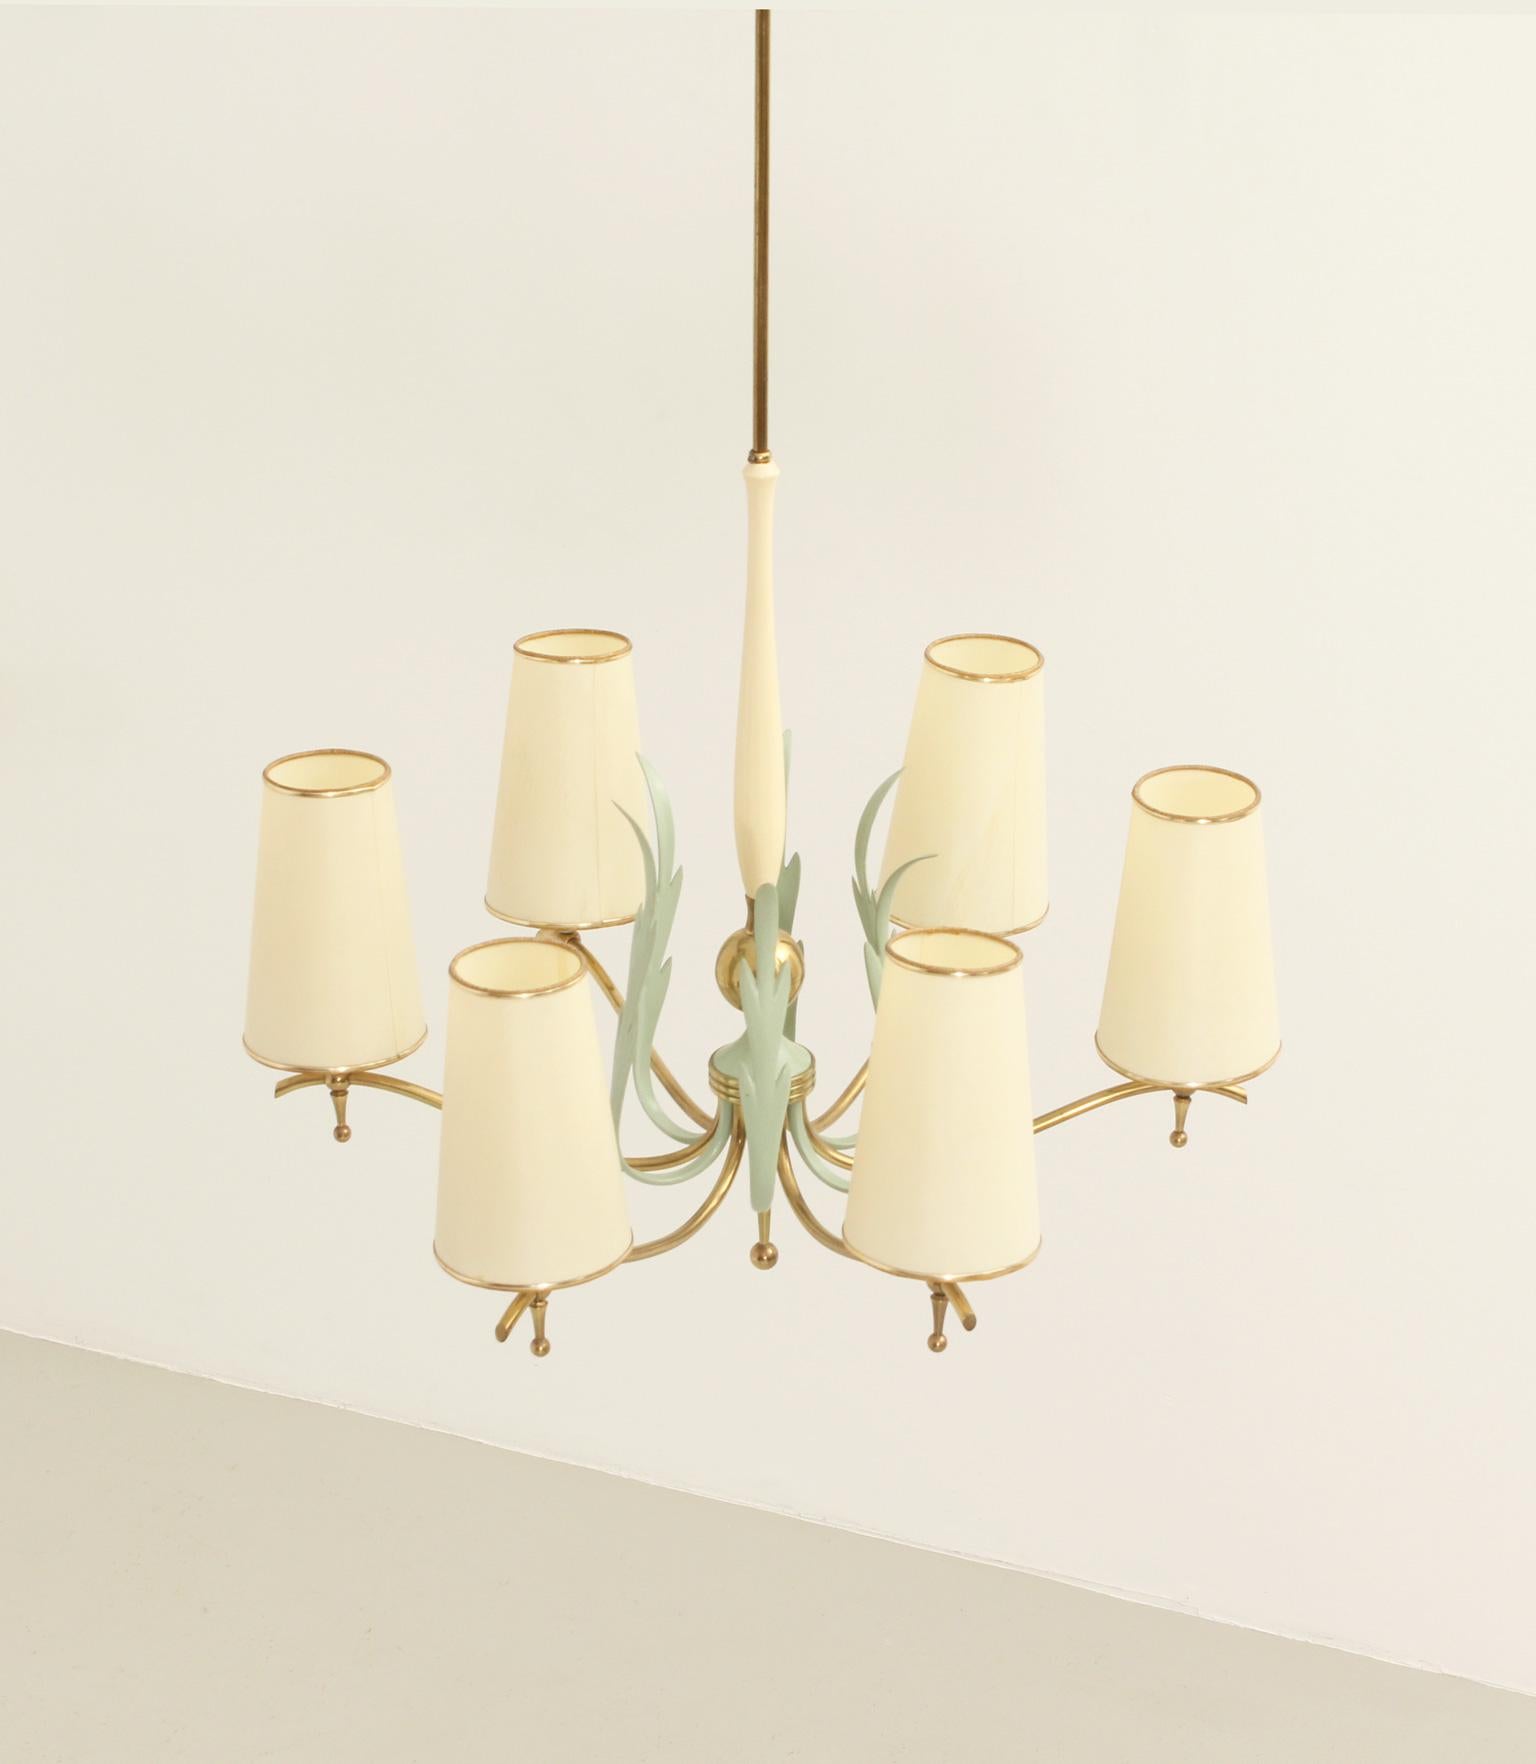 Pendant Lamp with Six Arms by Stilnovo, Italy, 1940's For Sale 4